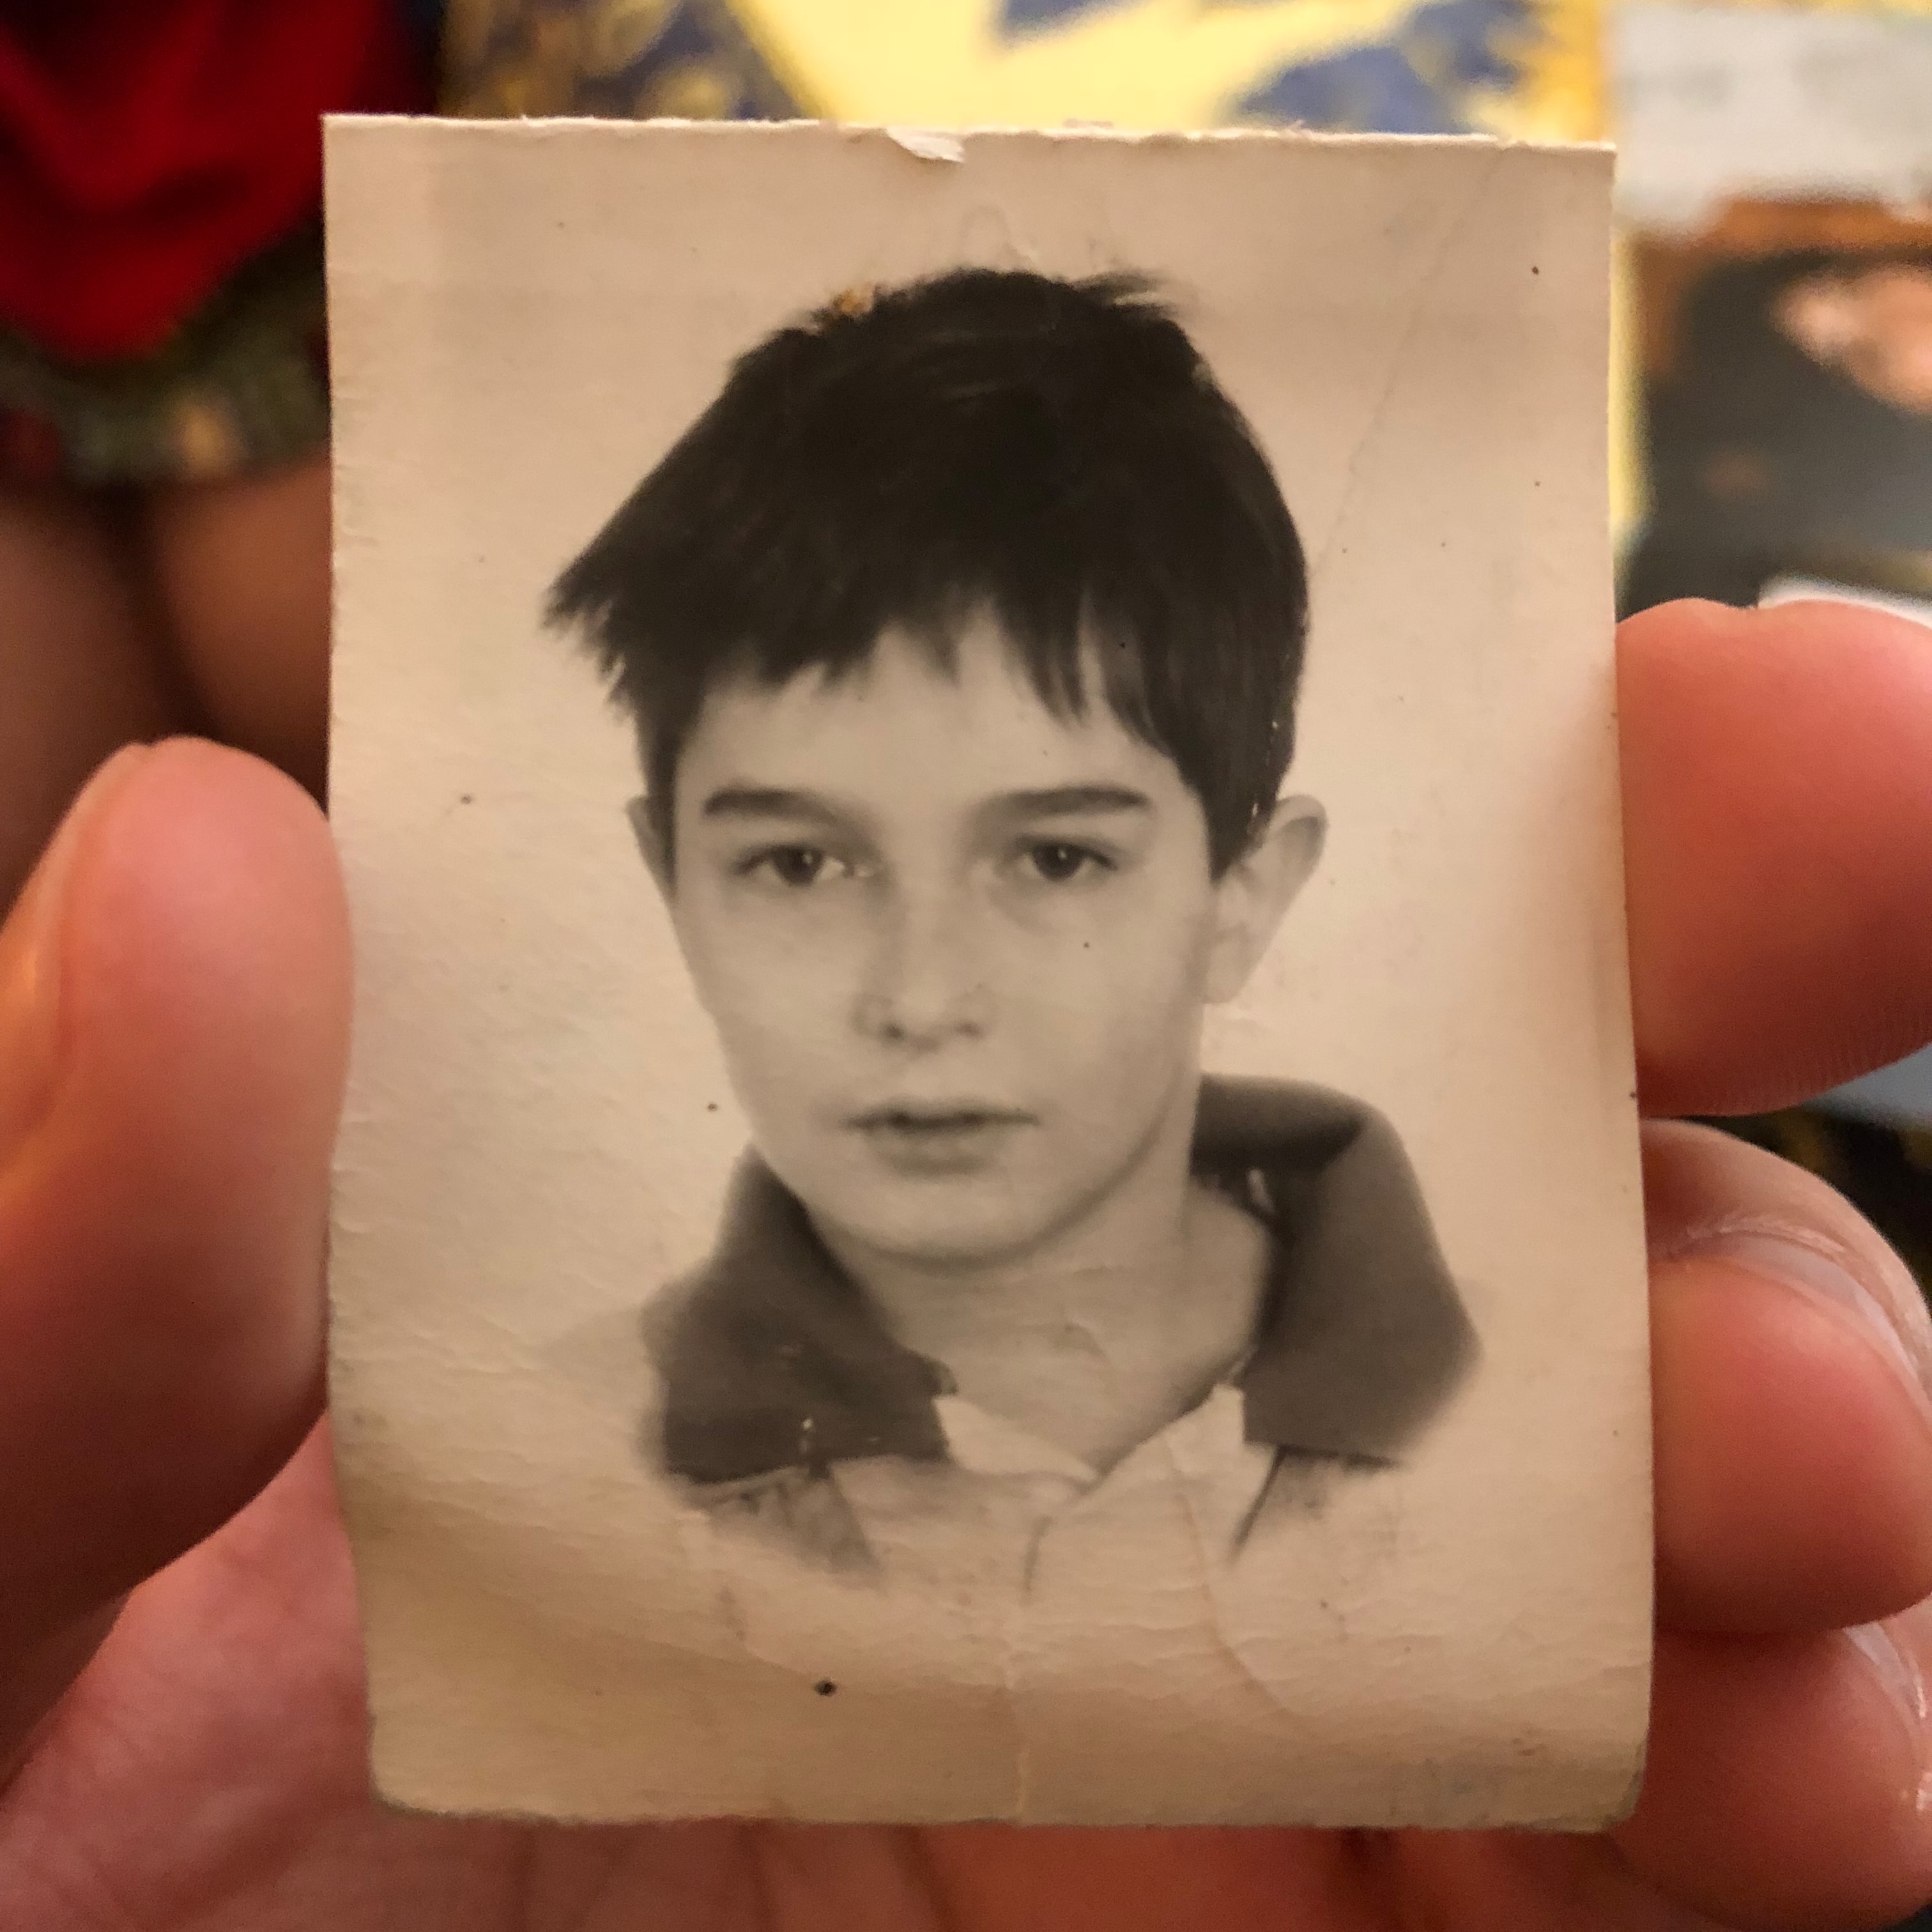 A photo of a black and white passport-sized childhood photograph of the author